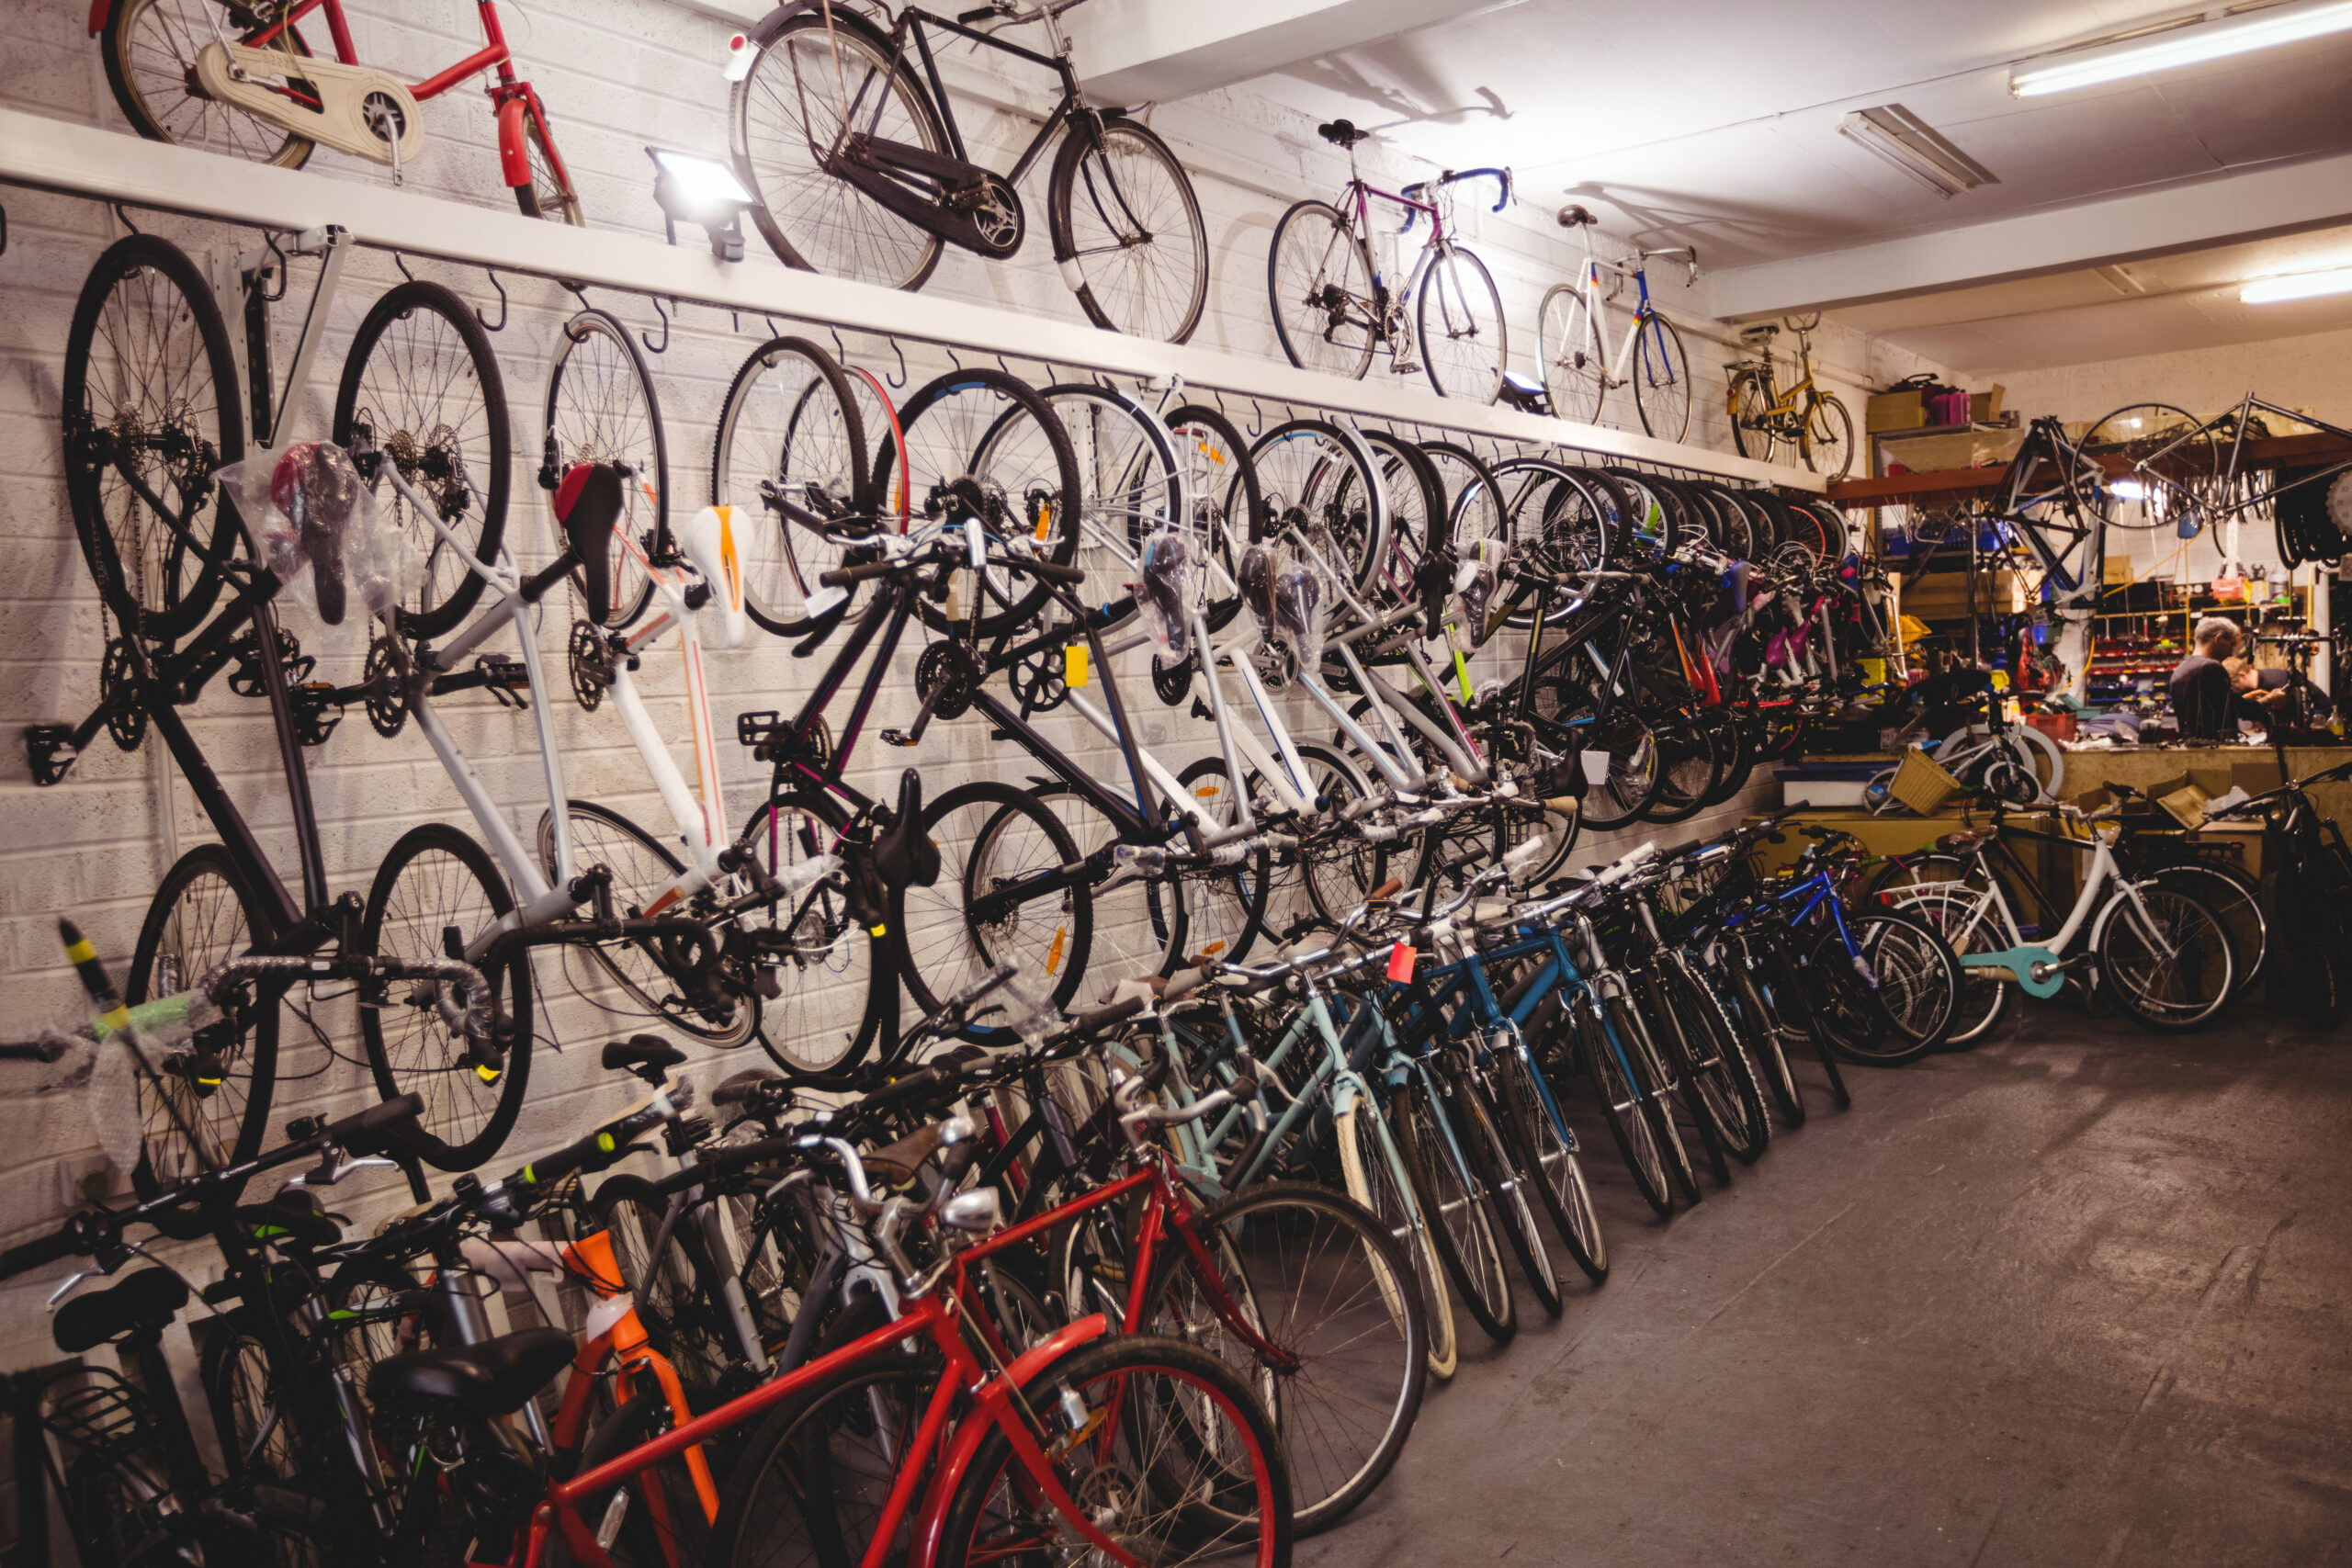 5 Cycle Stores in Chandigarh to Buy Sports Bicycles, Mountain Bikes & More